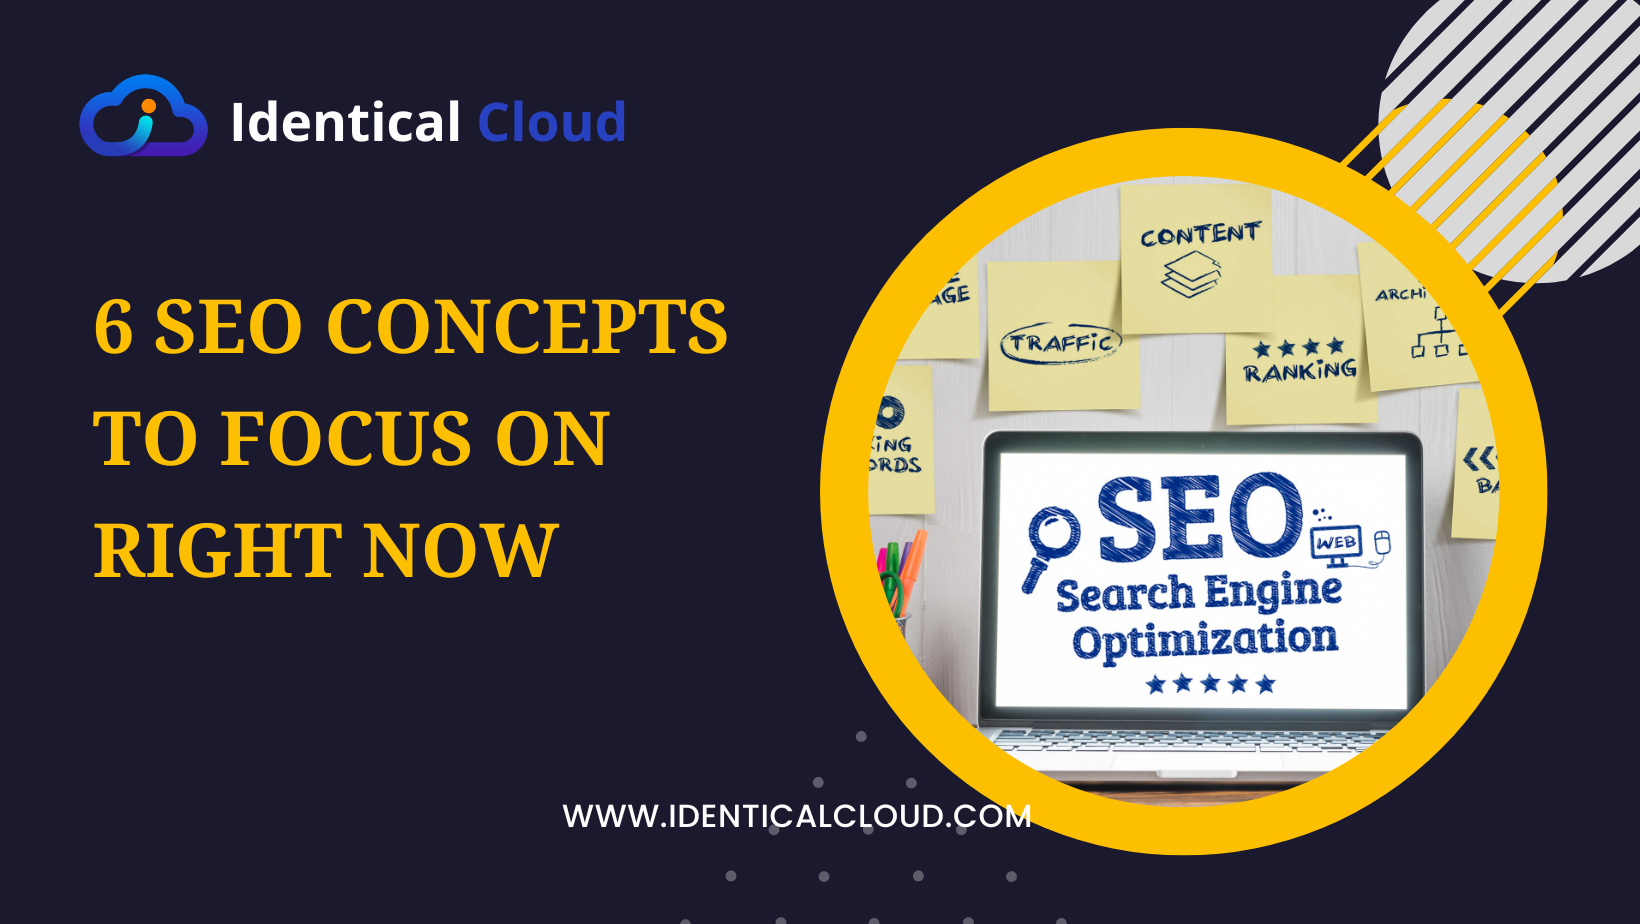 6 SEO Concepts to Focus on Right Now - identicalcloud.com